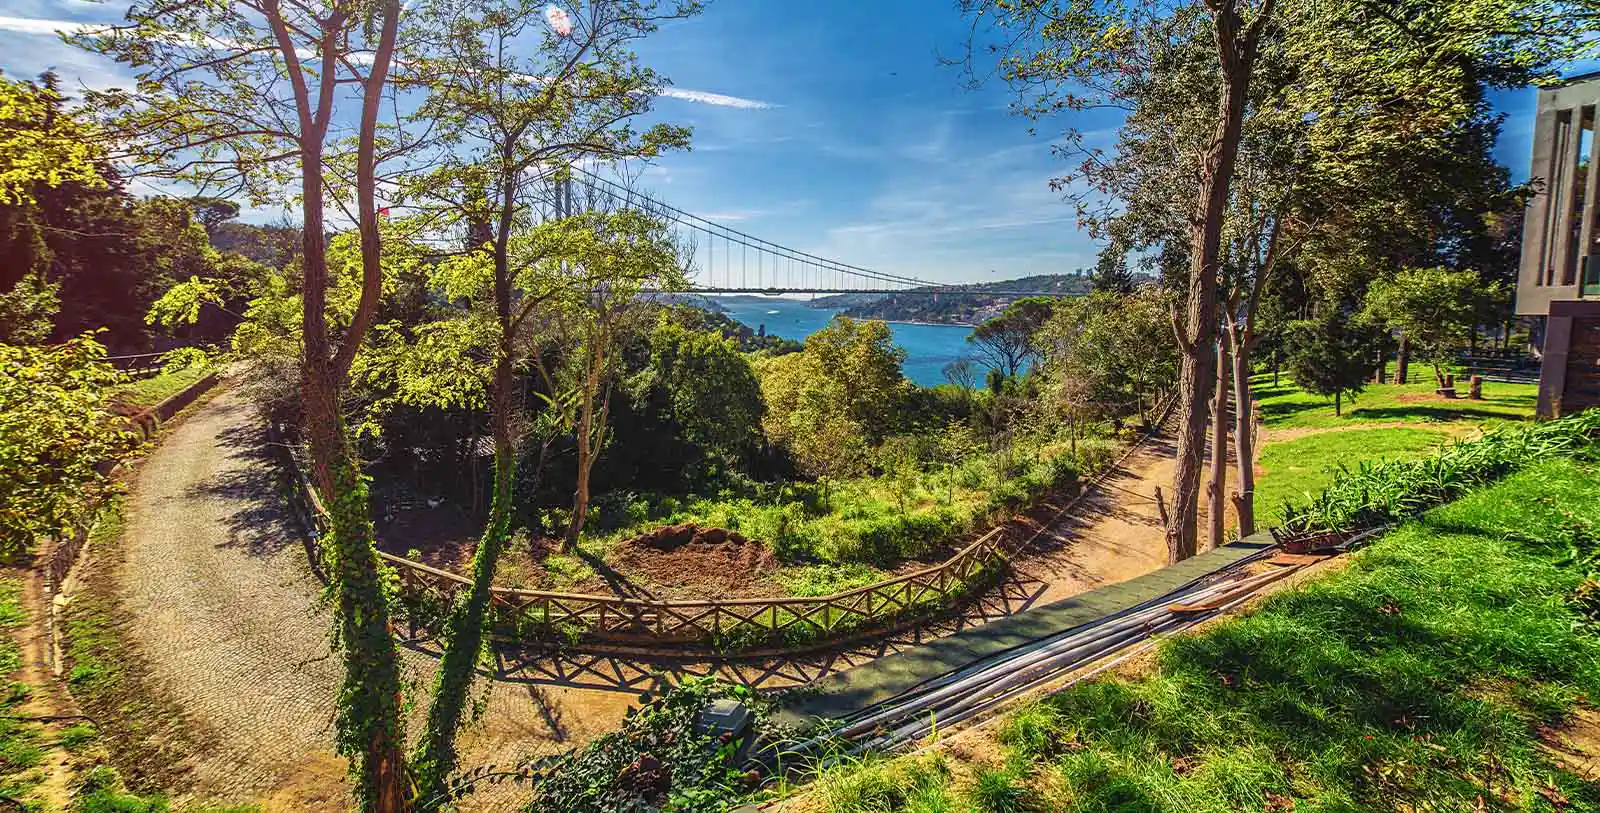 a view from a forest in Beykoz, luxurious neighborhood in İstanbul